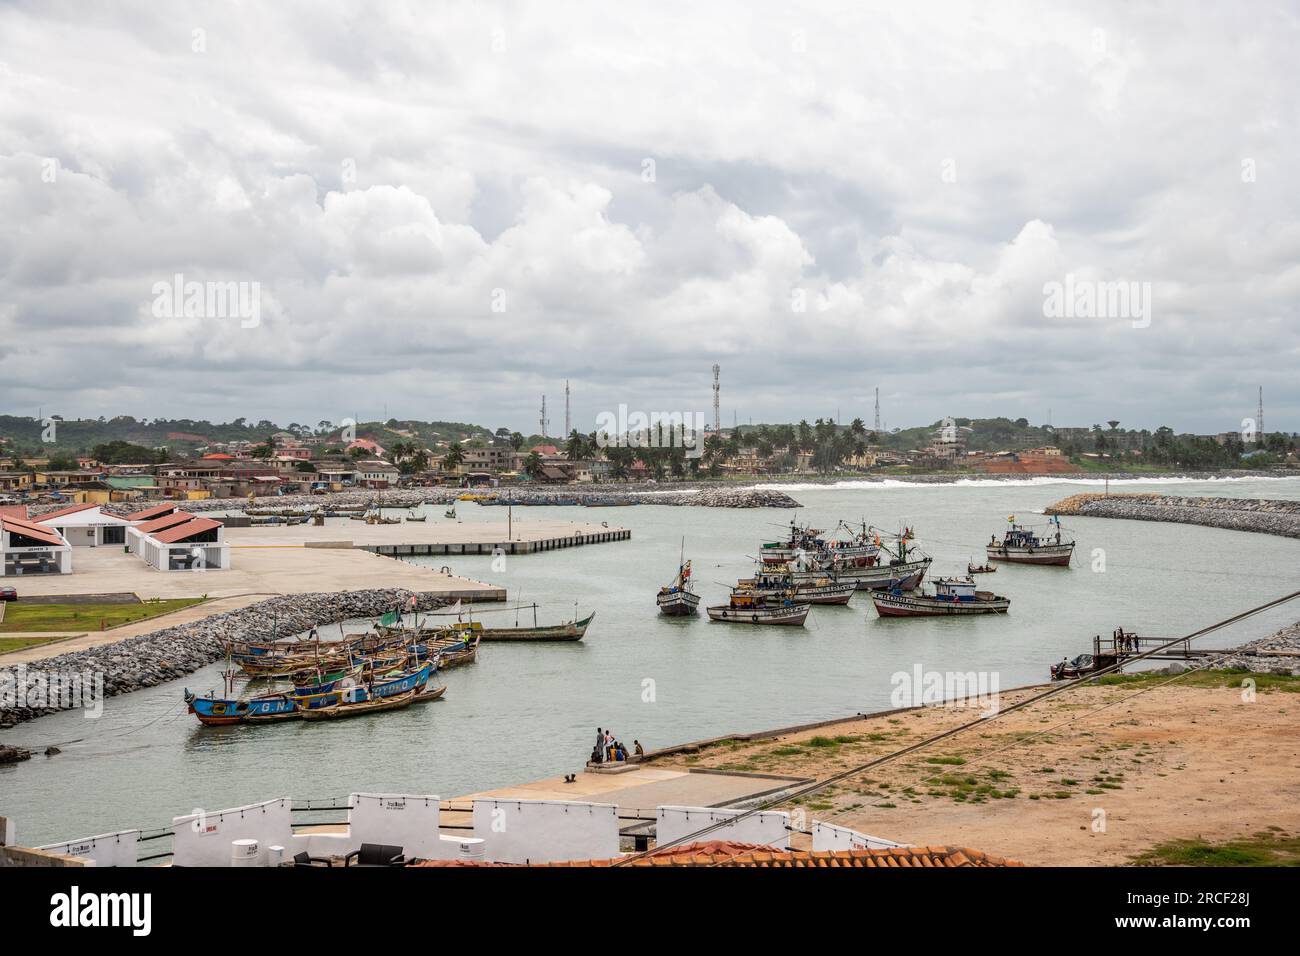 traditional wooden fishing boats in the harbor at Elmina, Ghana Stock Photo